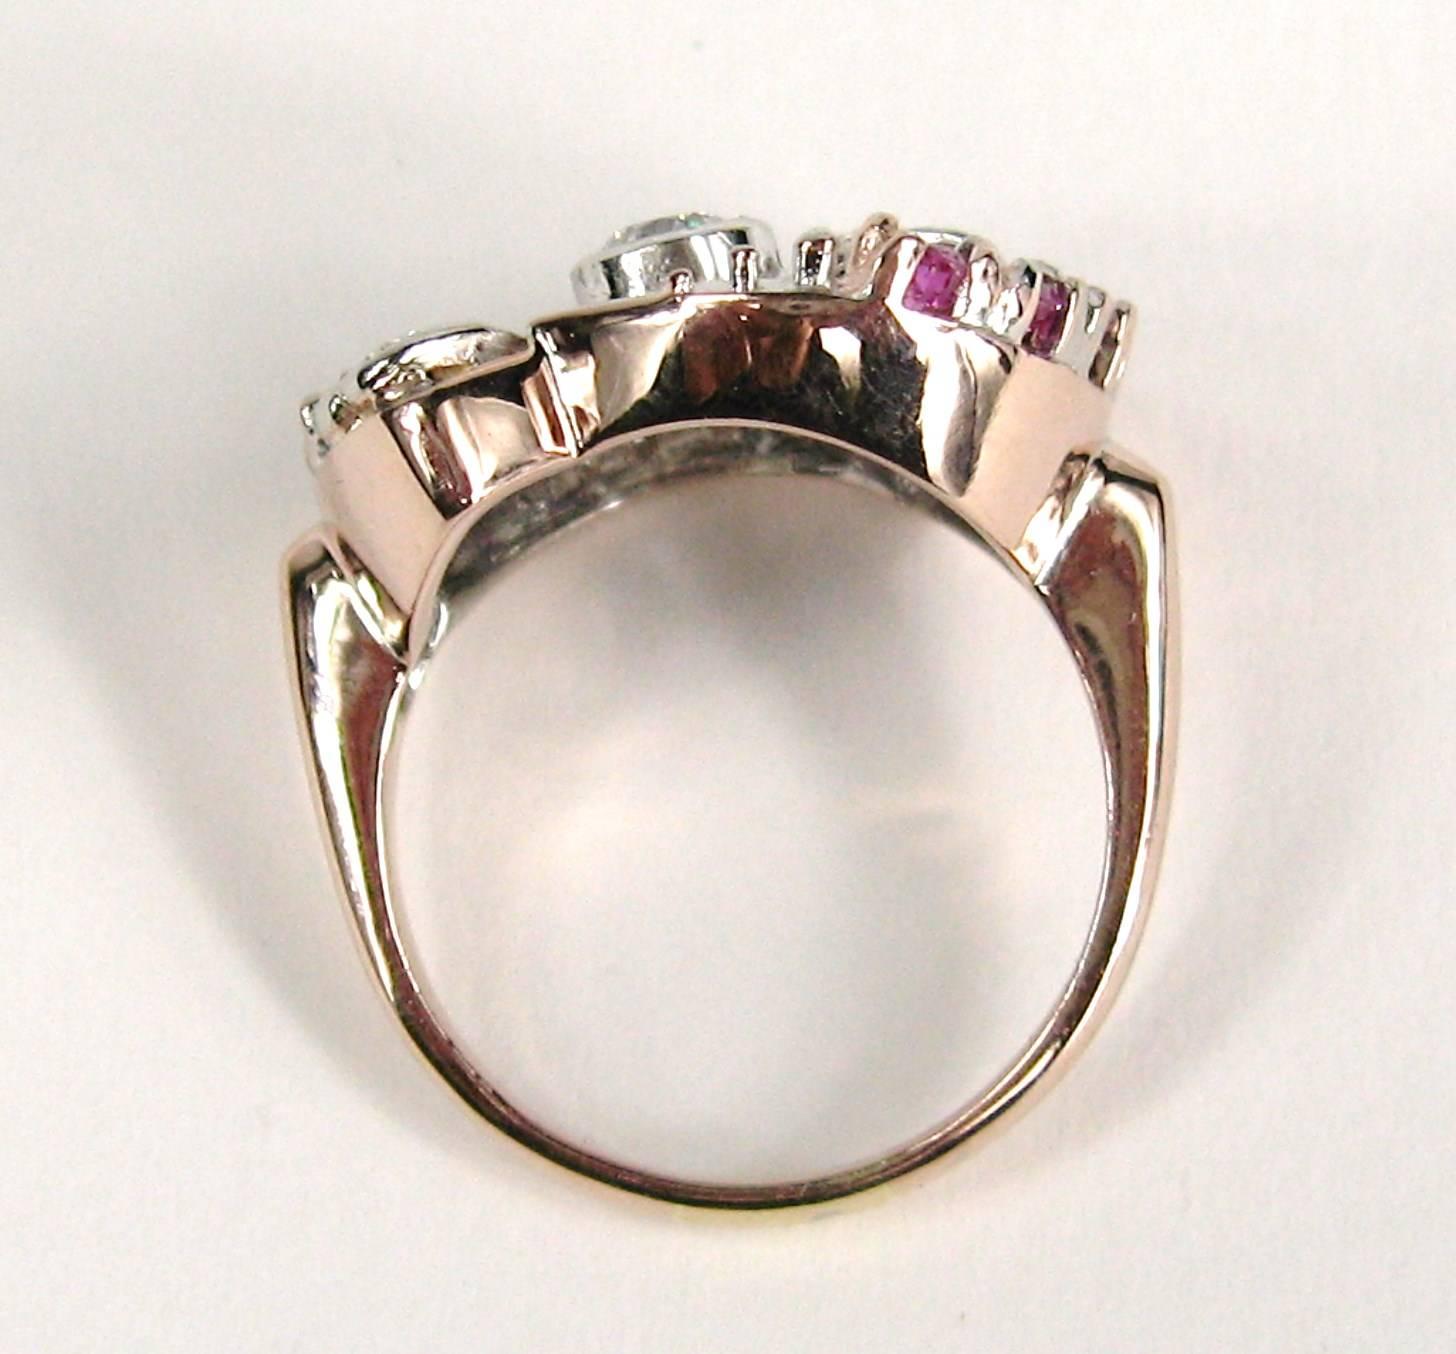 Diamond Ruby 14 Karat Rose and White Gold Ring, 1940s Art Deco In Good Condition For Sale In Wallkill, NY